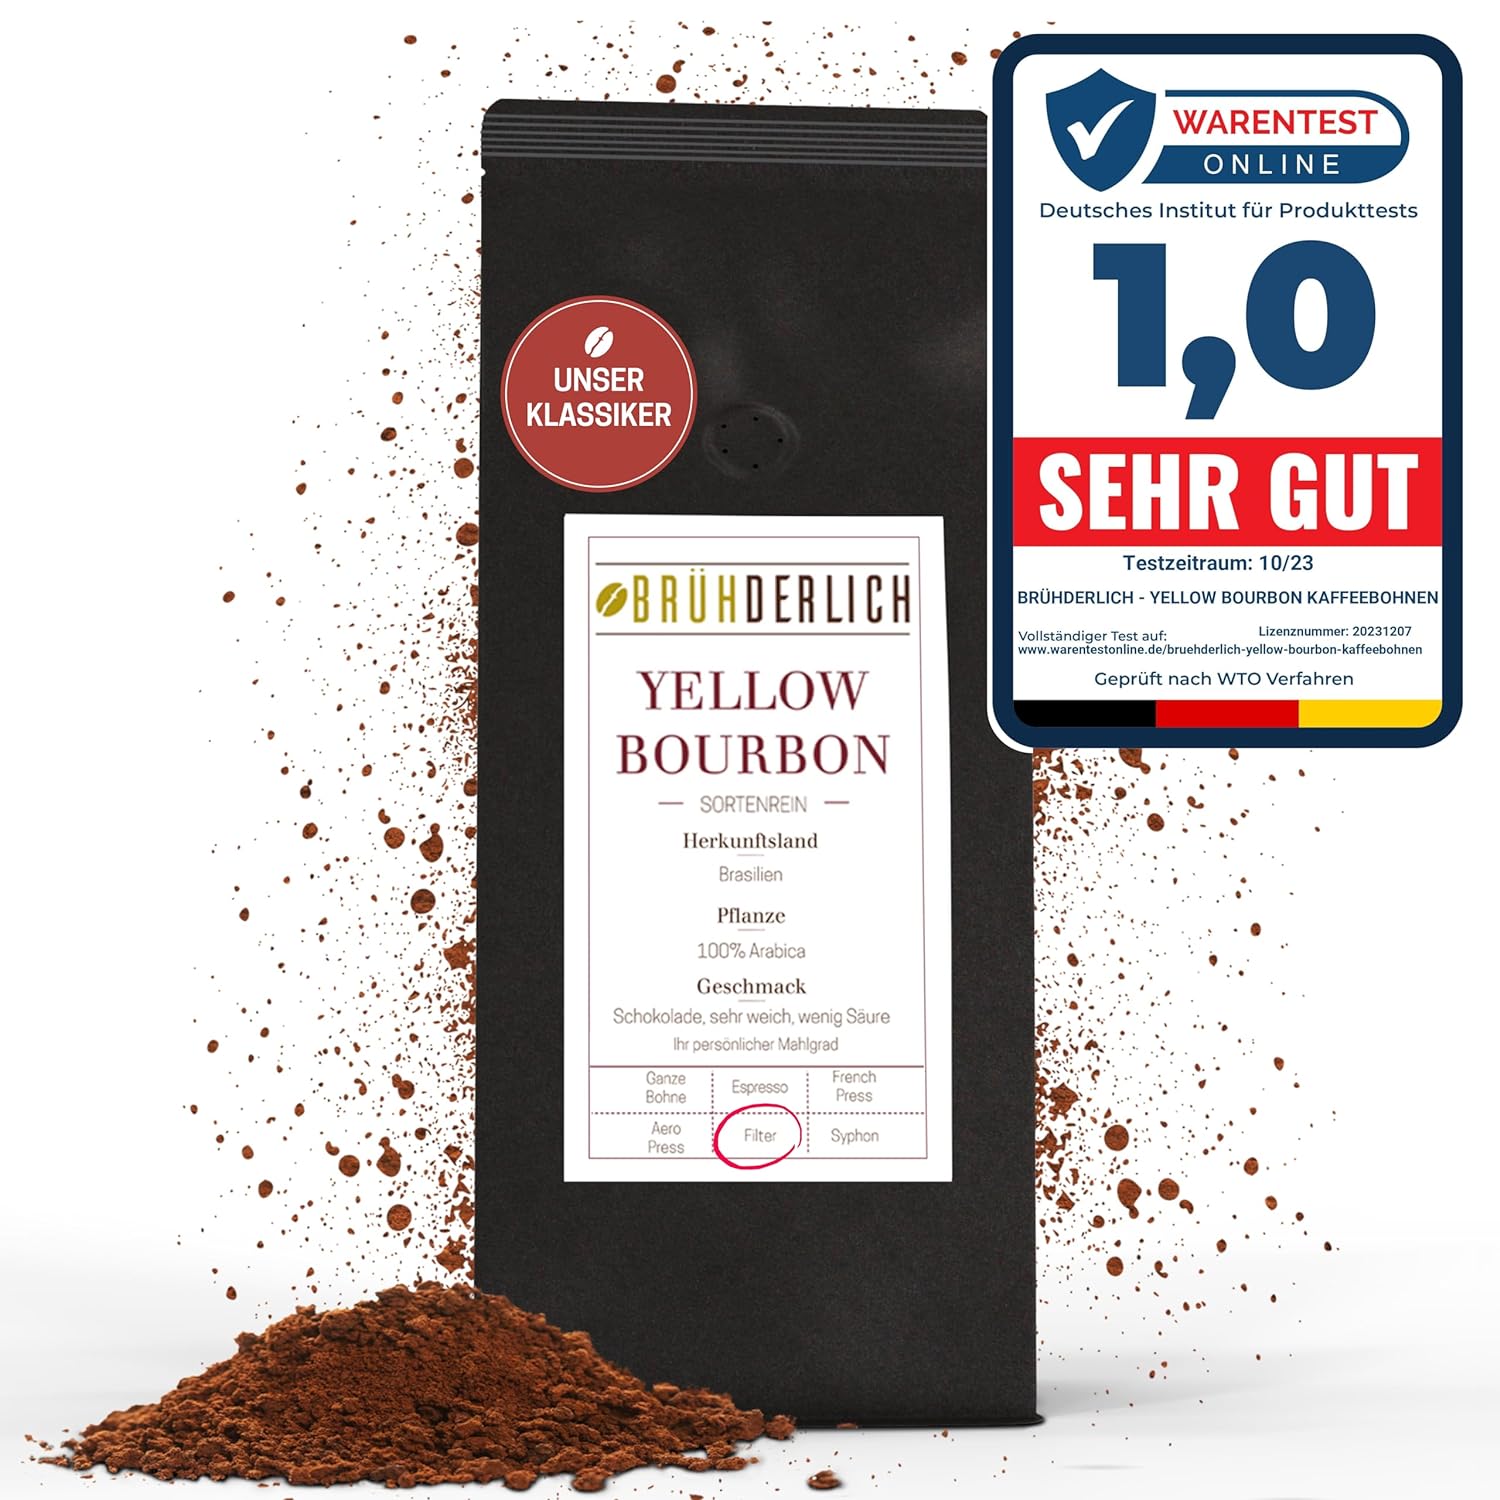 BRÜHDERLICH Yellow Bourbon Premium Ground Coffee Beans (500 g) - Exceptionally Mild and Low Acid - Special Arabica Coffee from Brazil - Freshly Ground Directly from the Roasting Factory